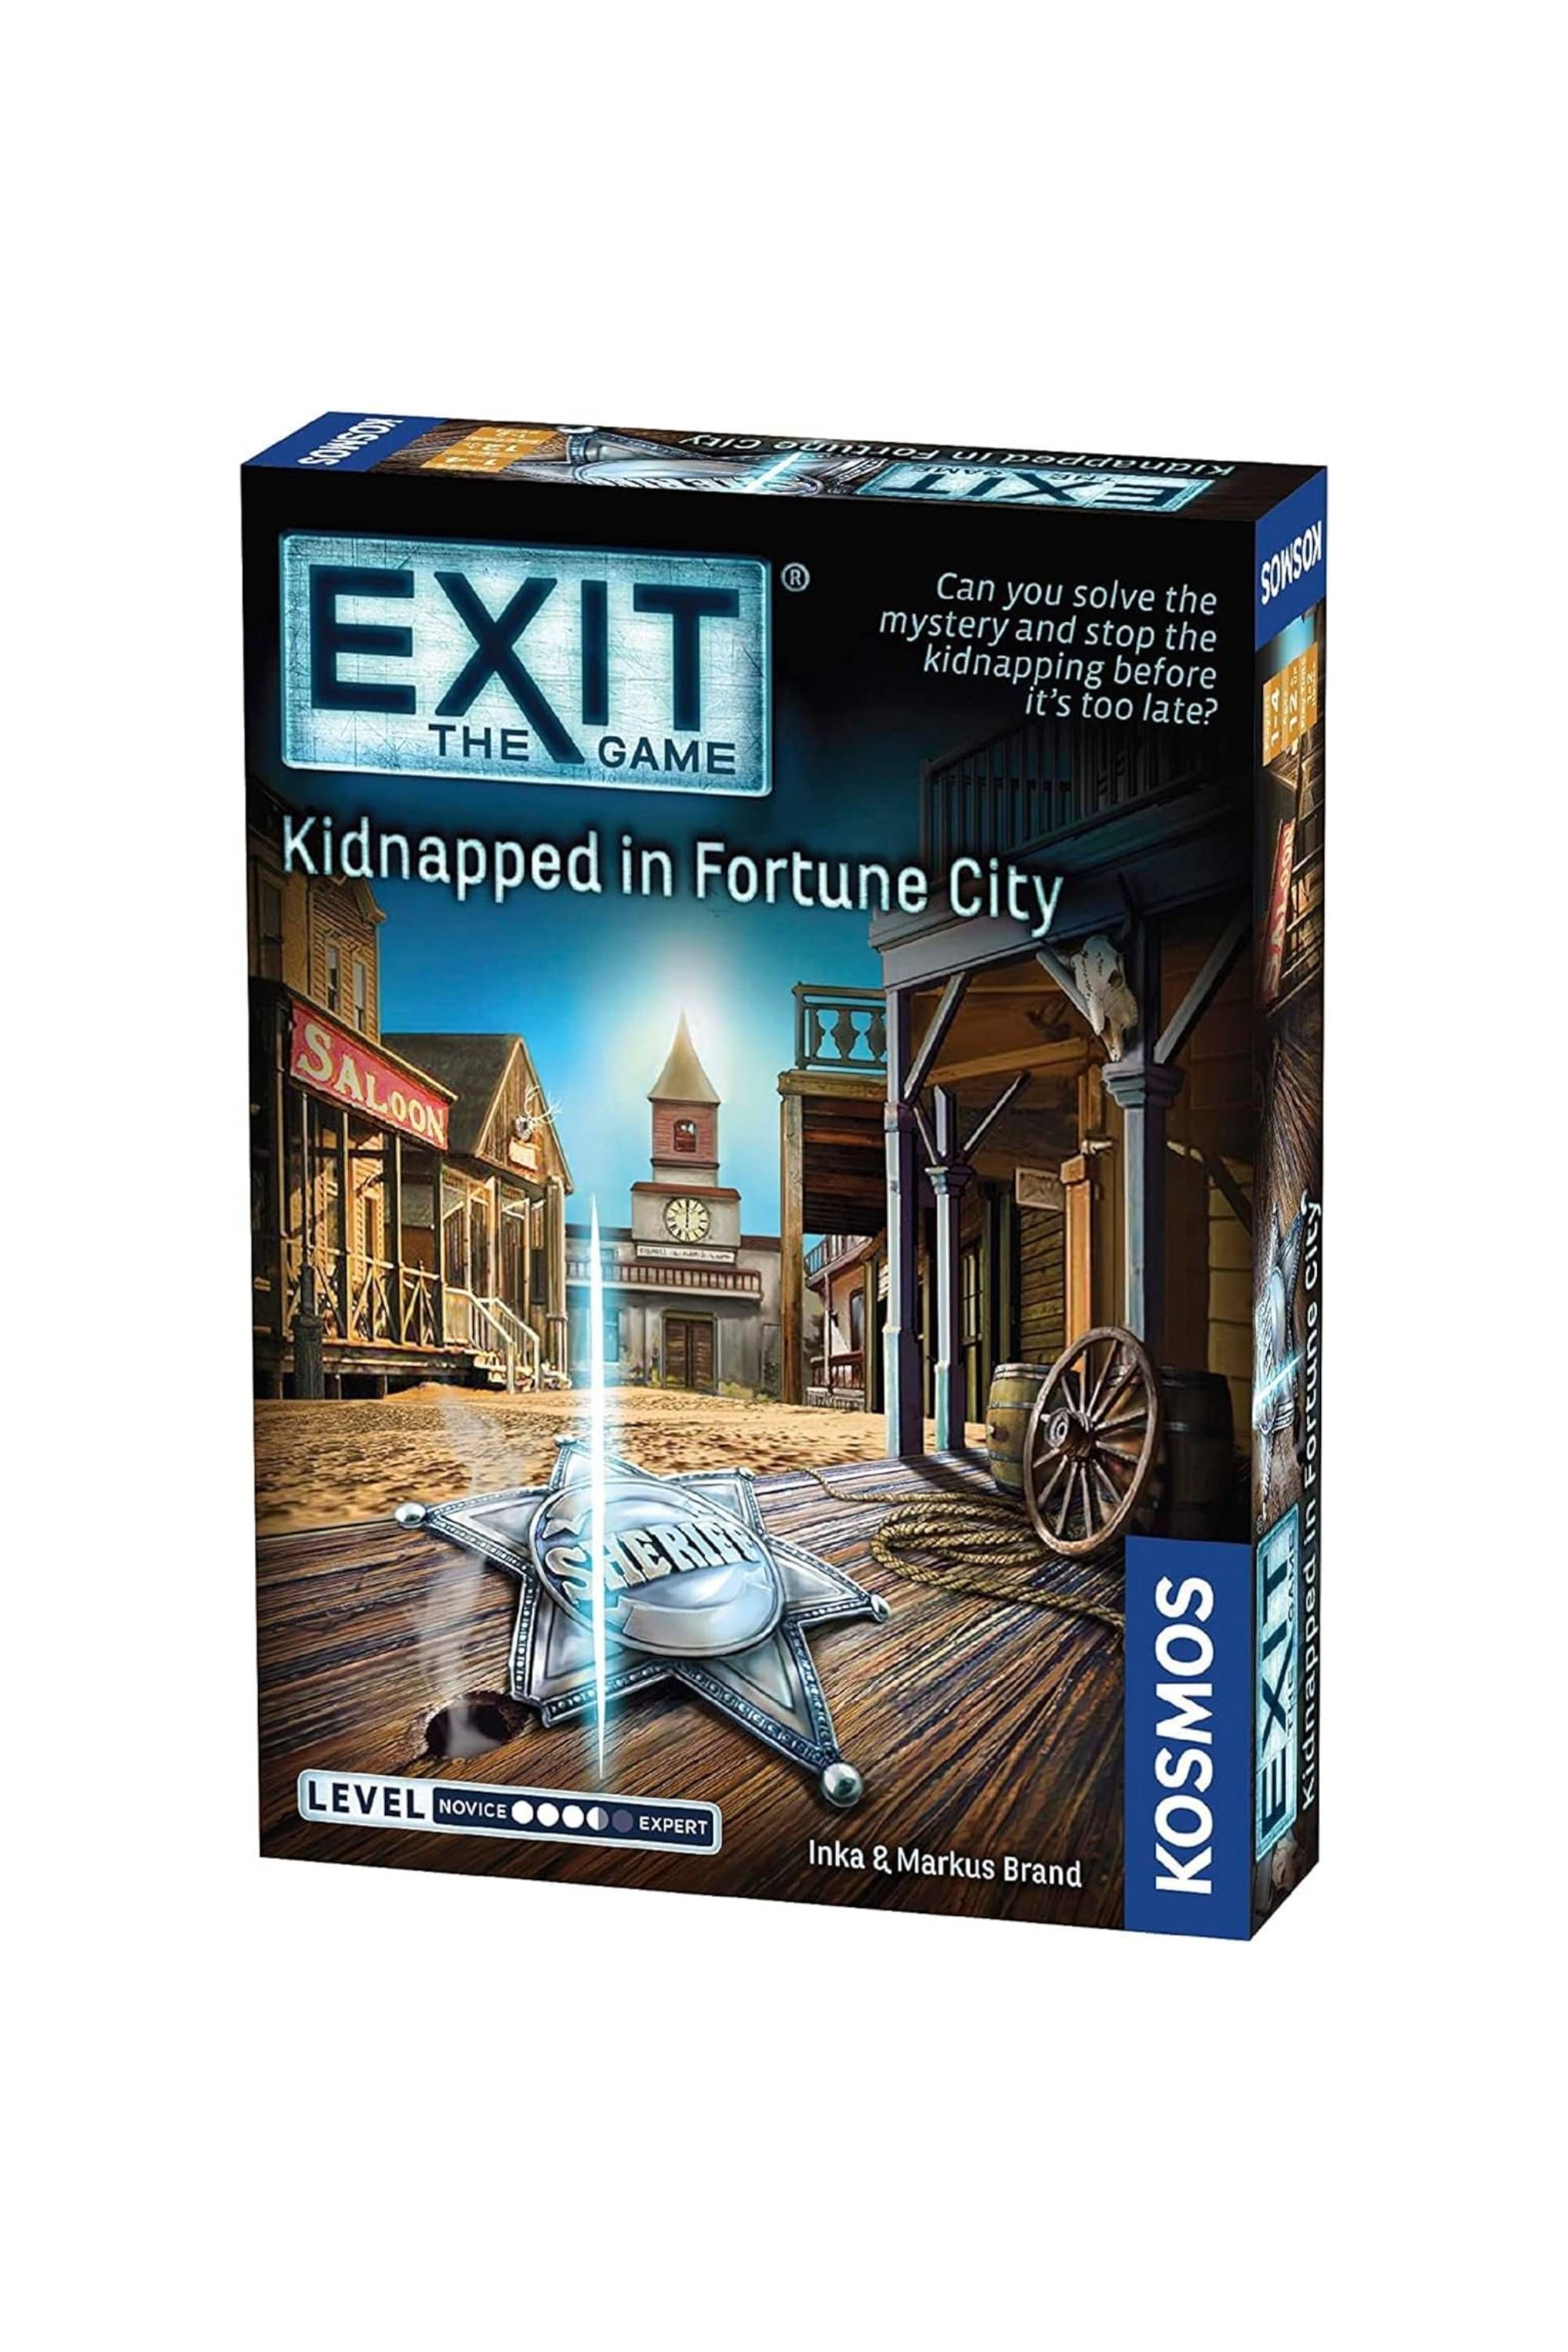 Exit - The Game - Kidnapped in Fortune City